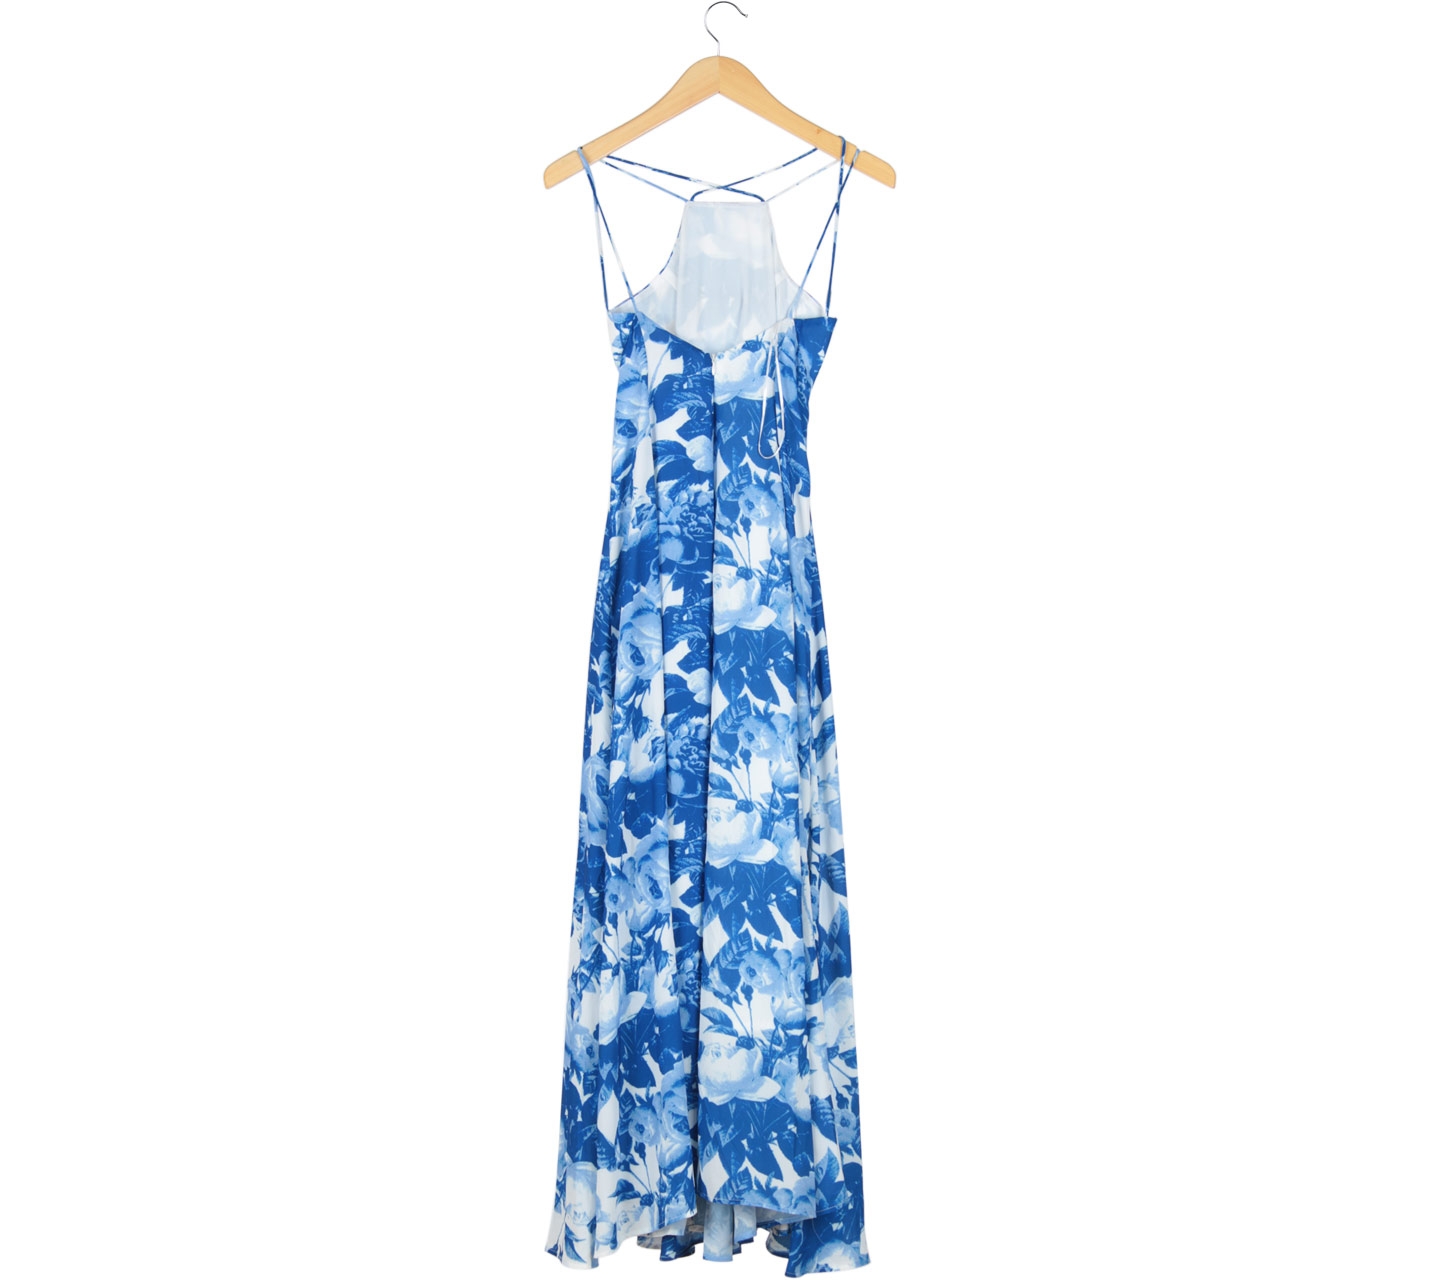 Swan by VGY Blue And White Floral Long Dress